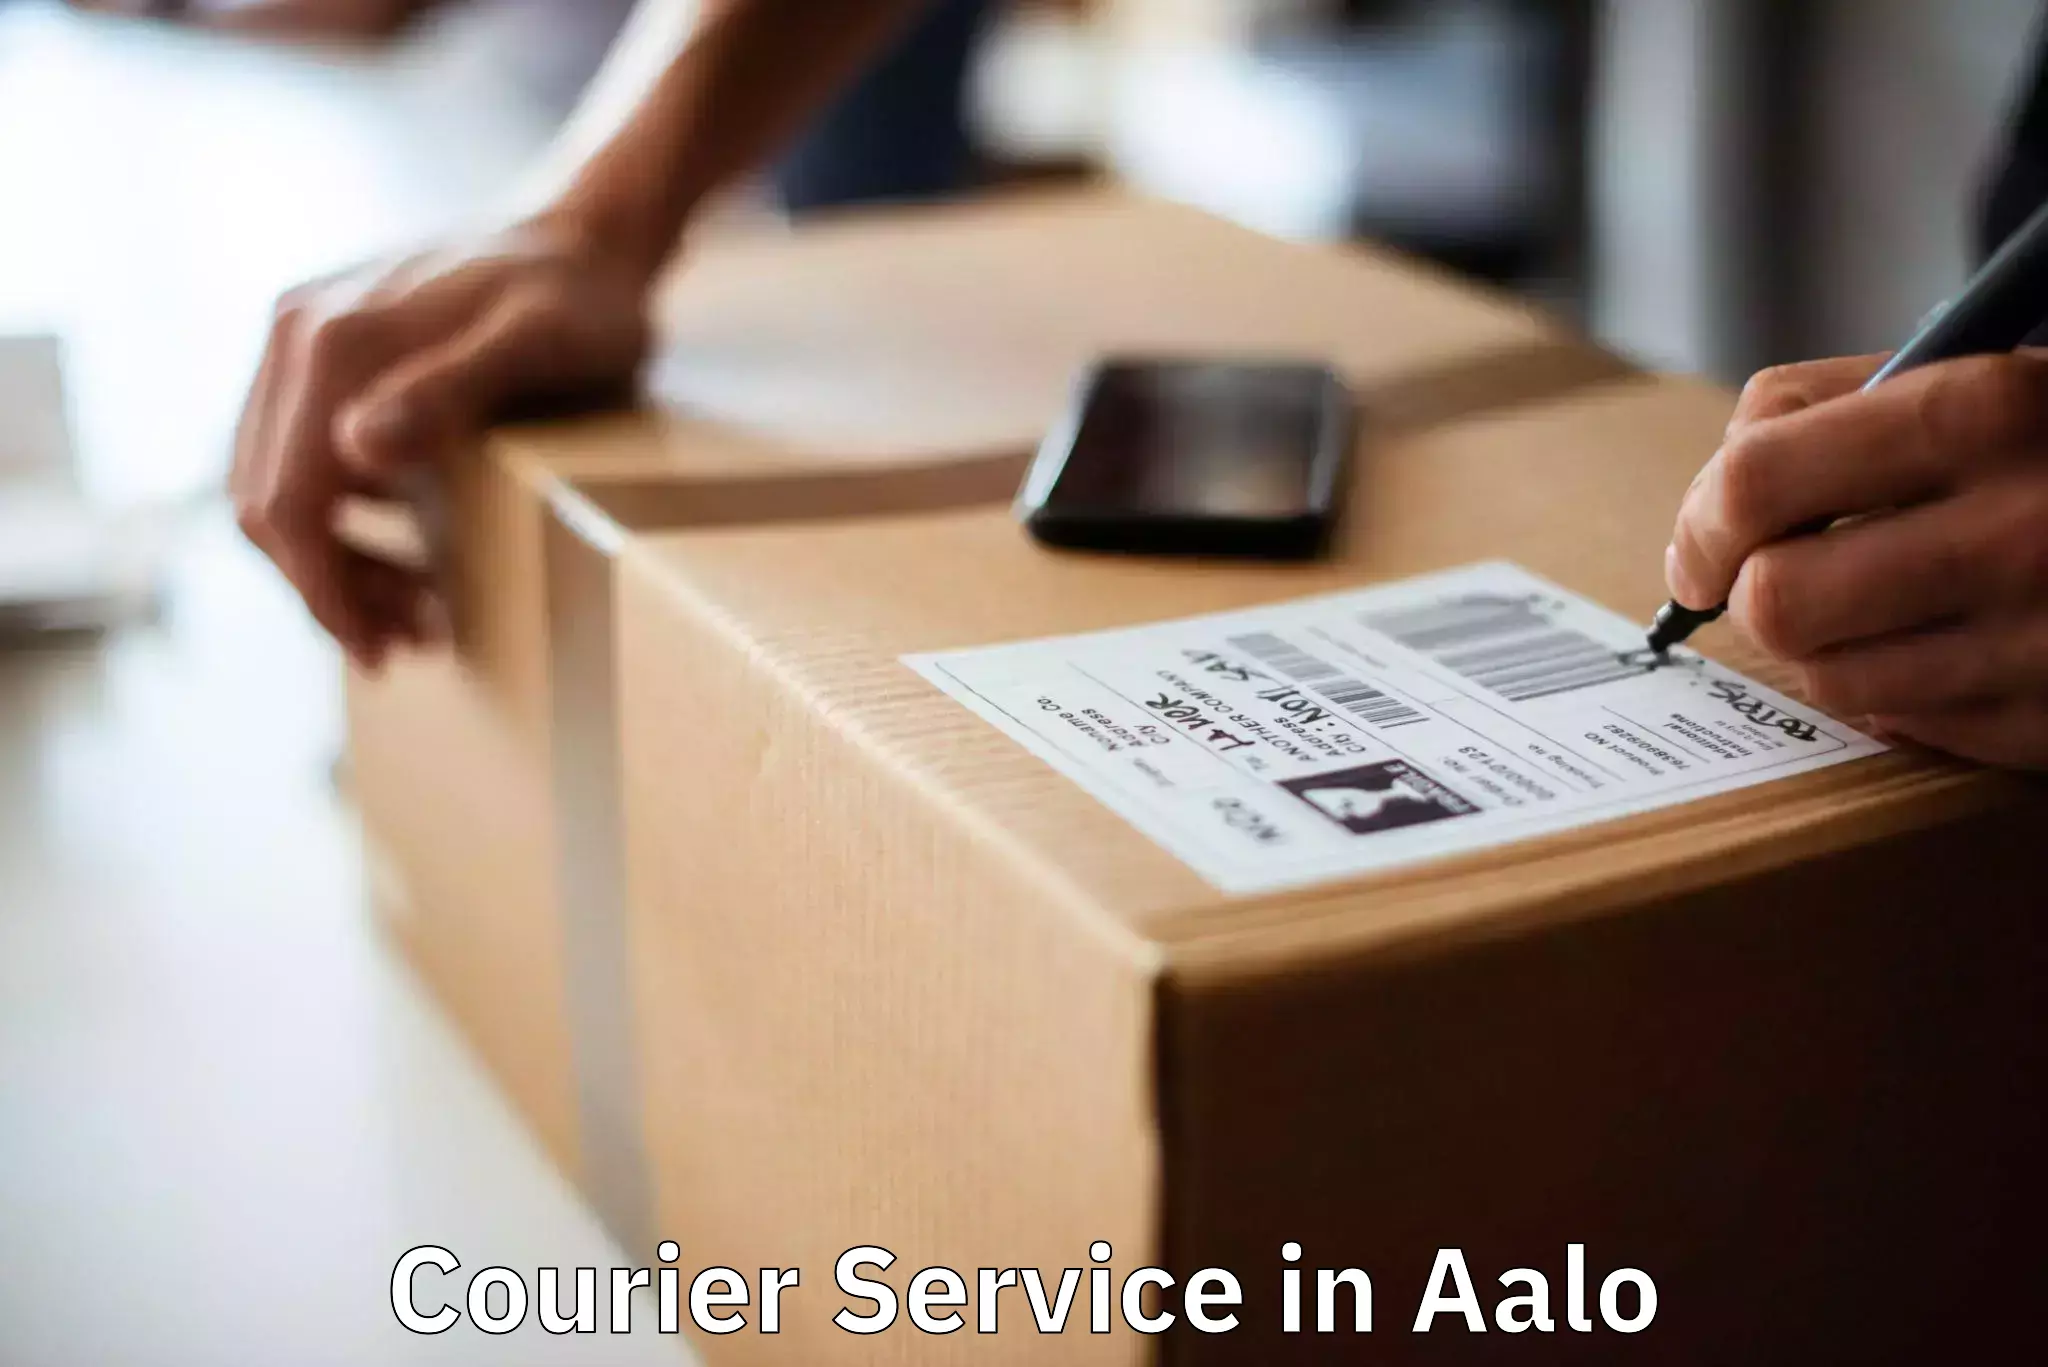 24/7 courier service in Aalo